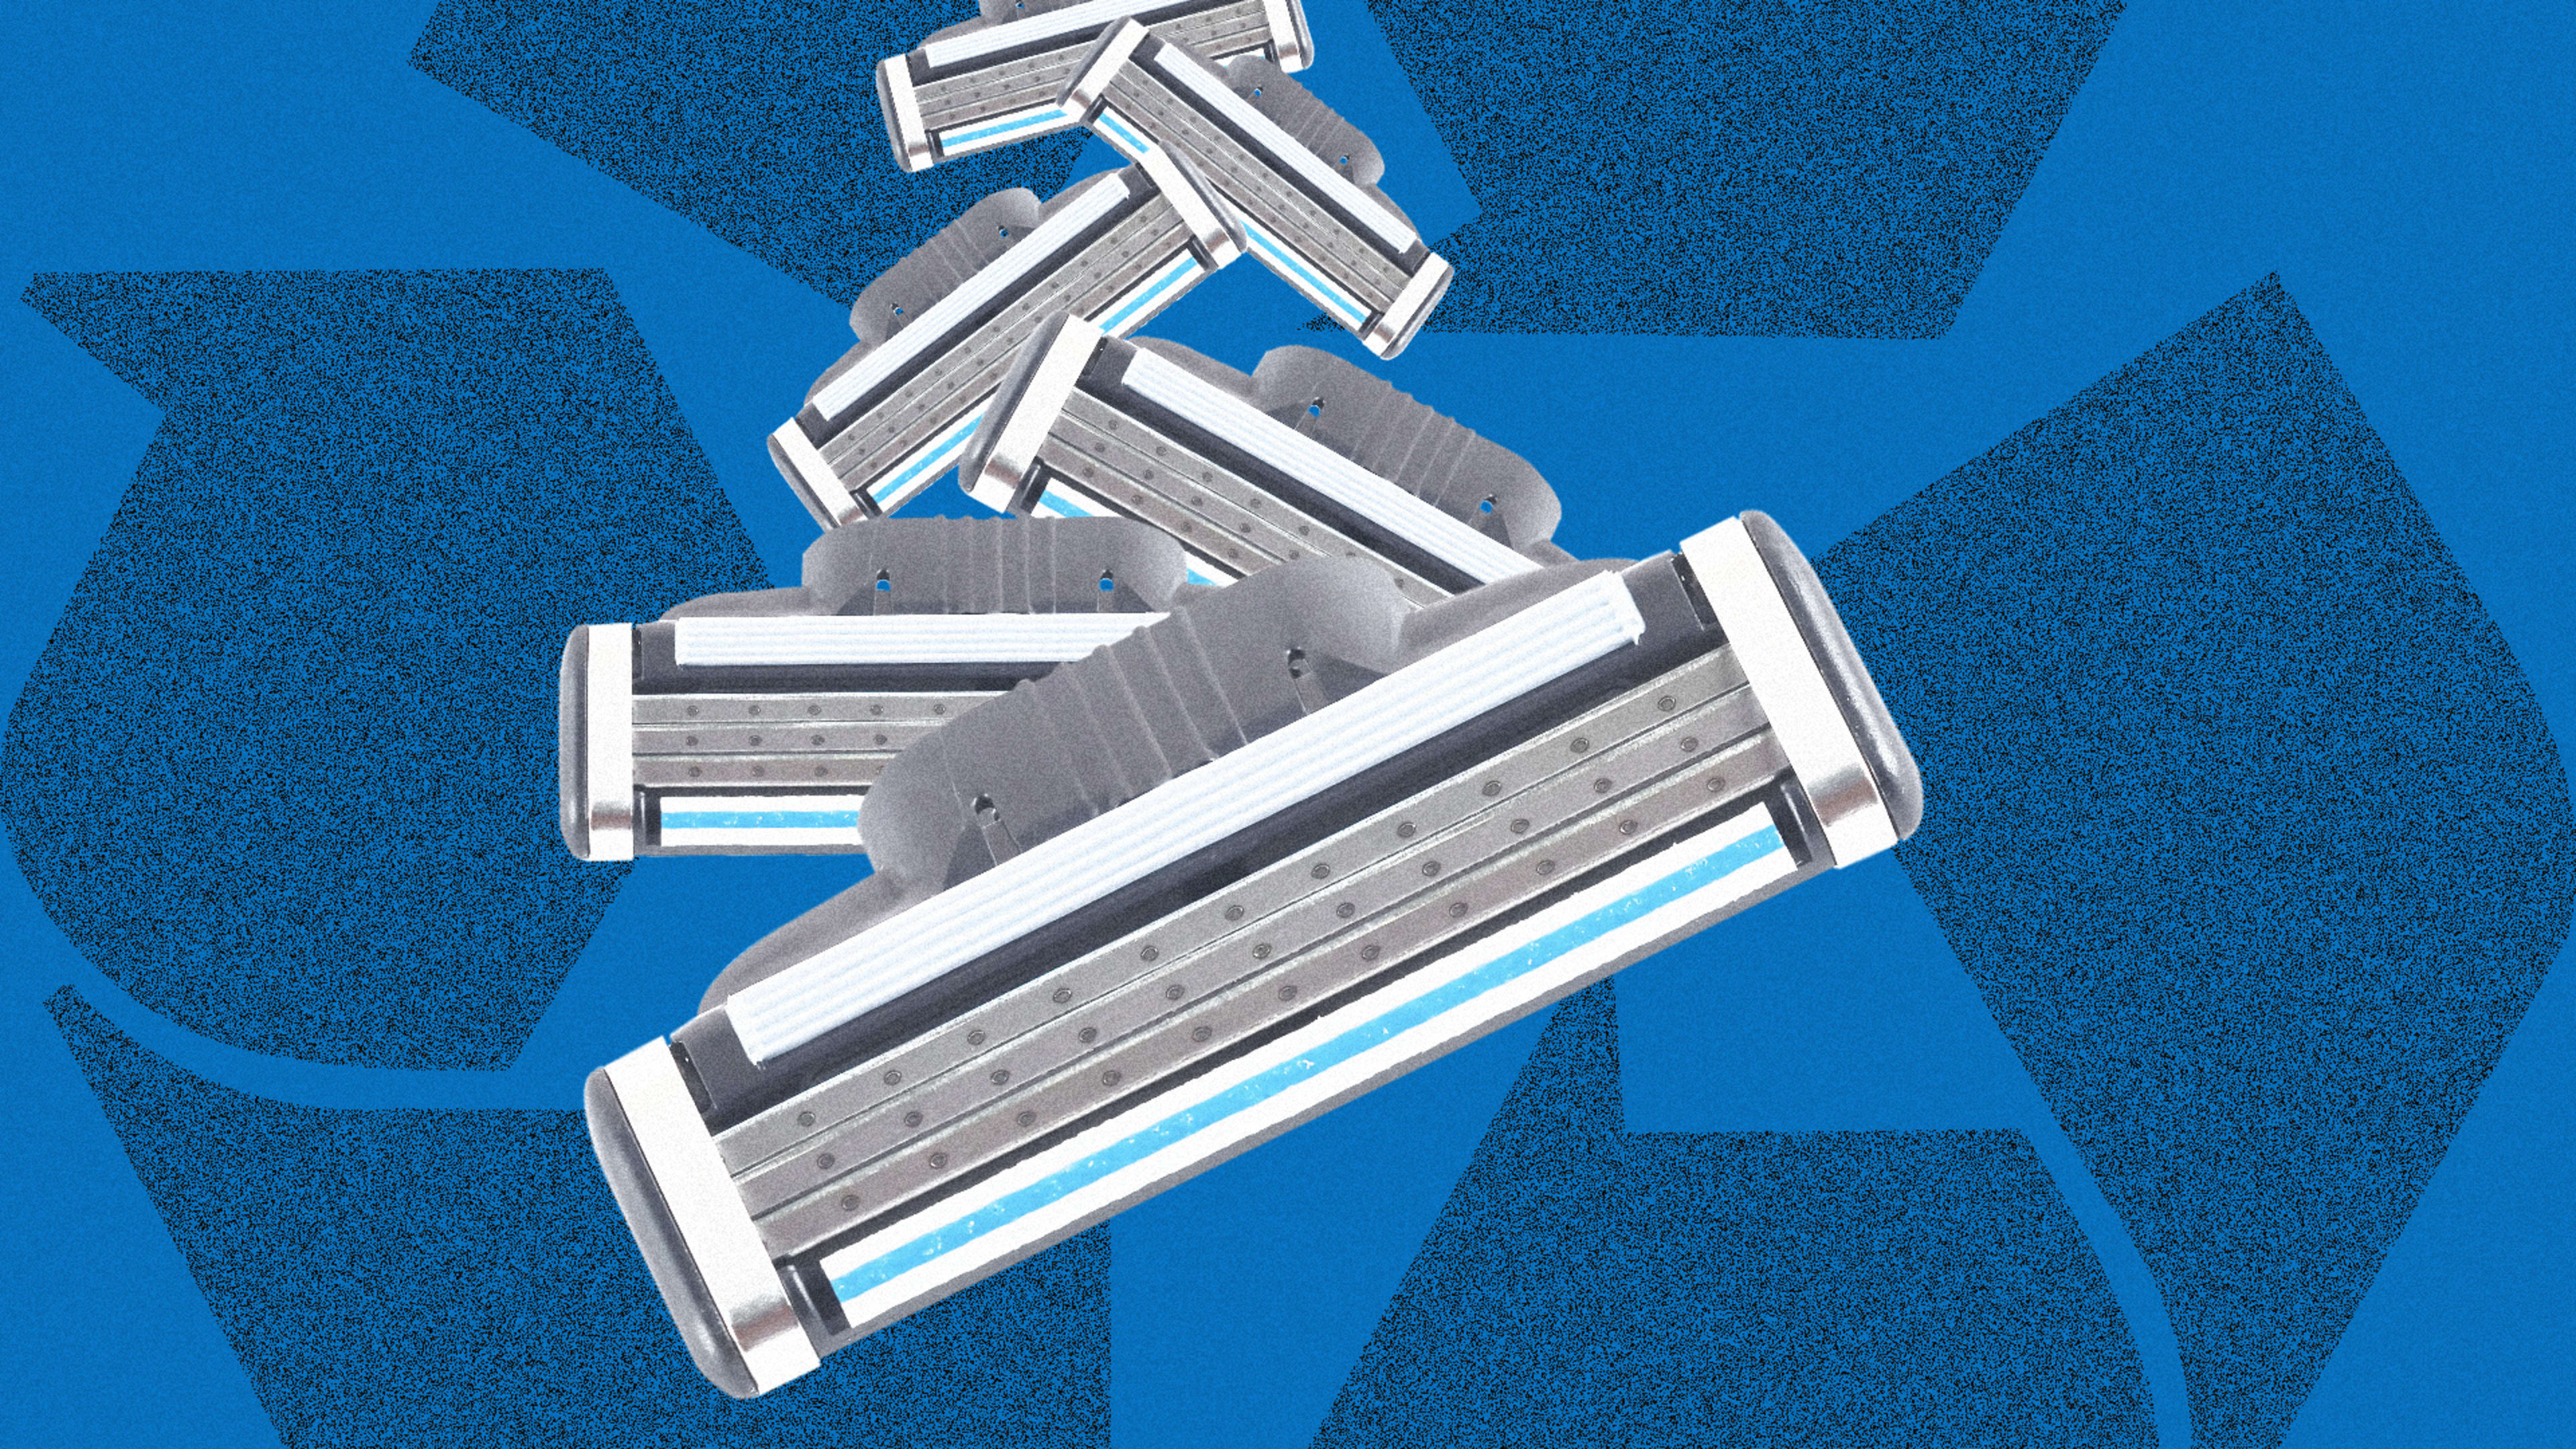 You can now send Gillette your old razors to have them recycled